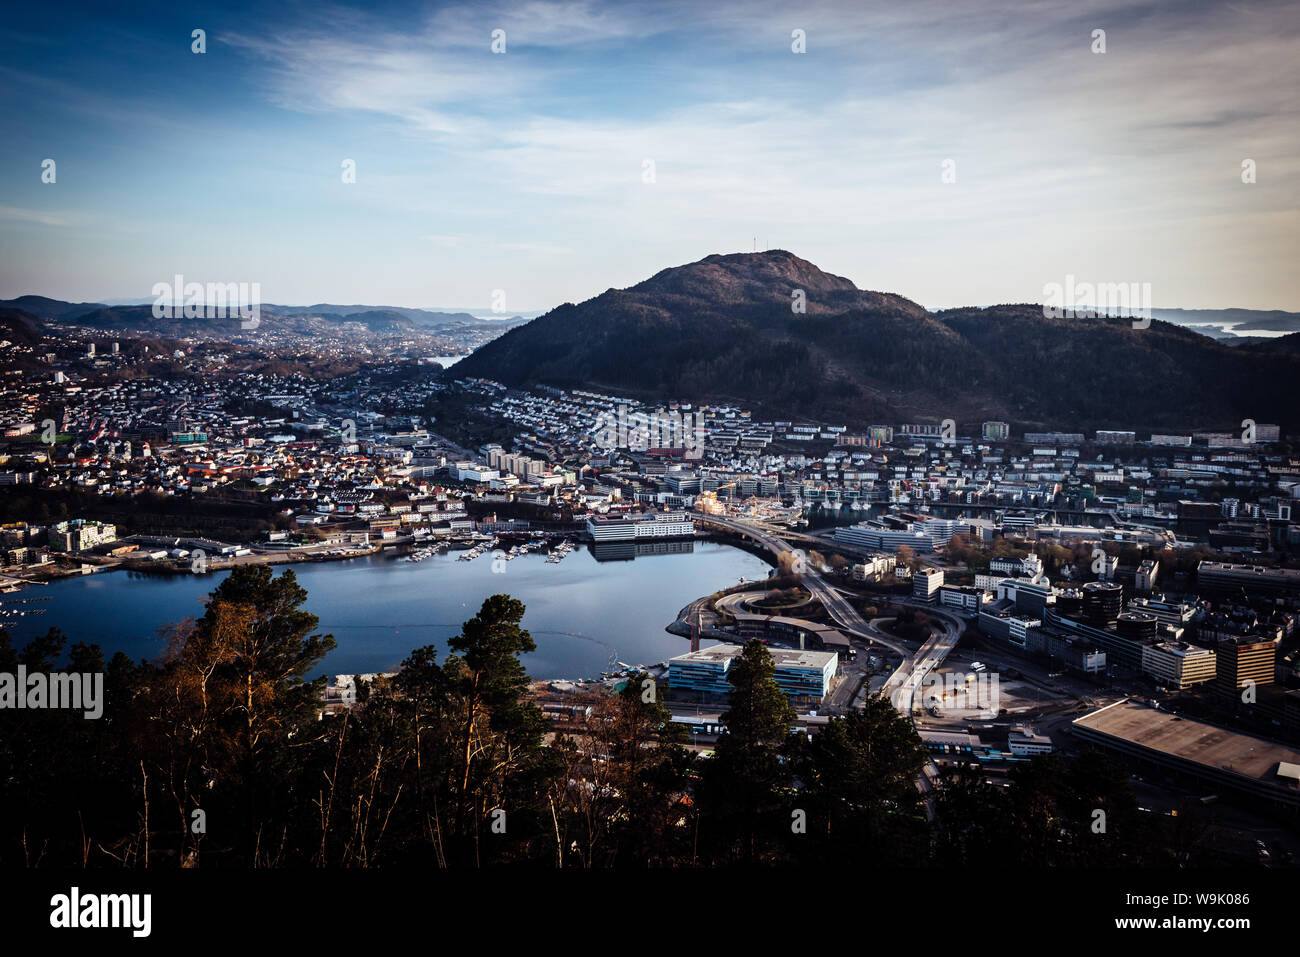 A high up view of Bergen city, Norway from mount Fløyen. Stock Photo